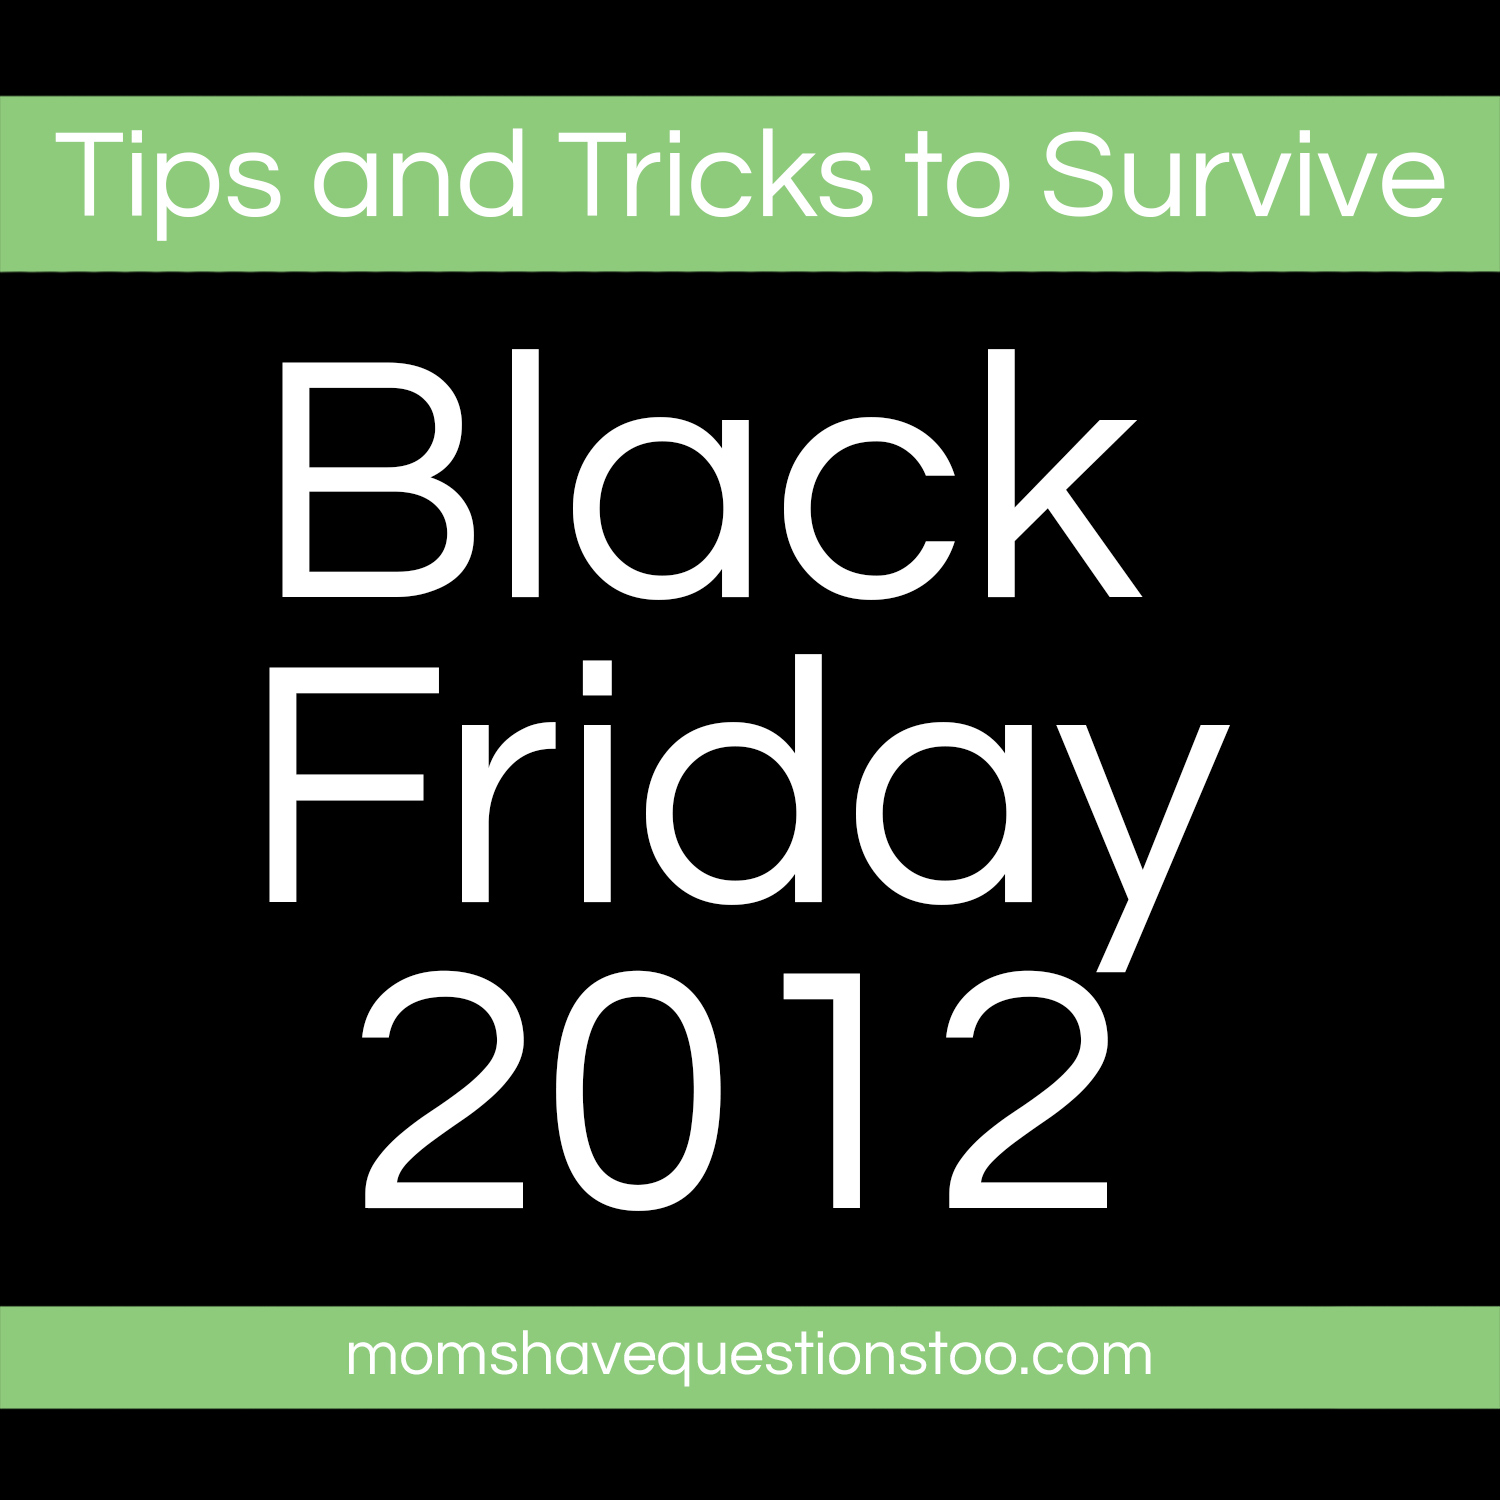 Tips and tricks for Black Friday 2012